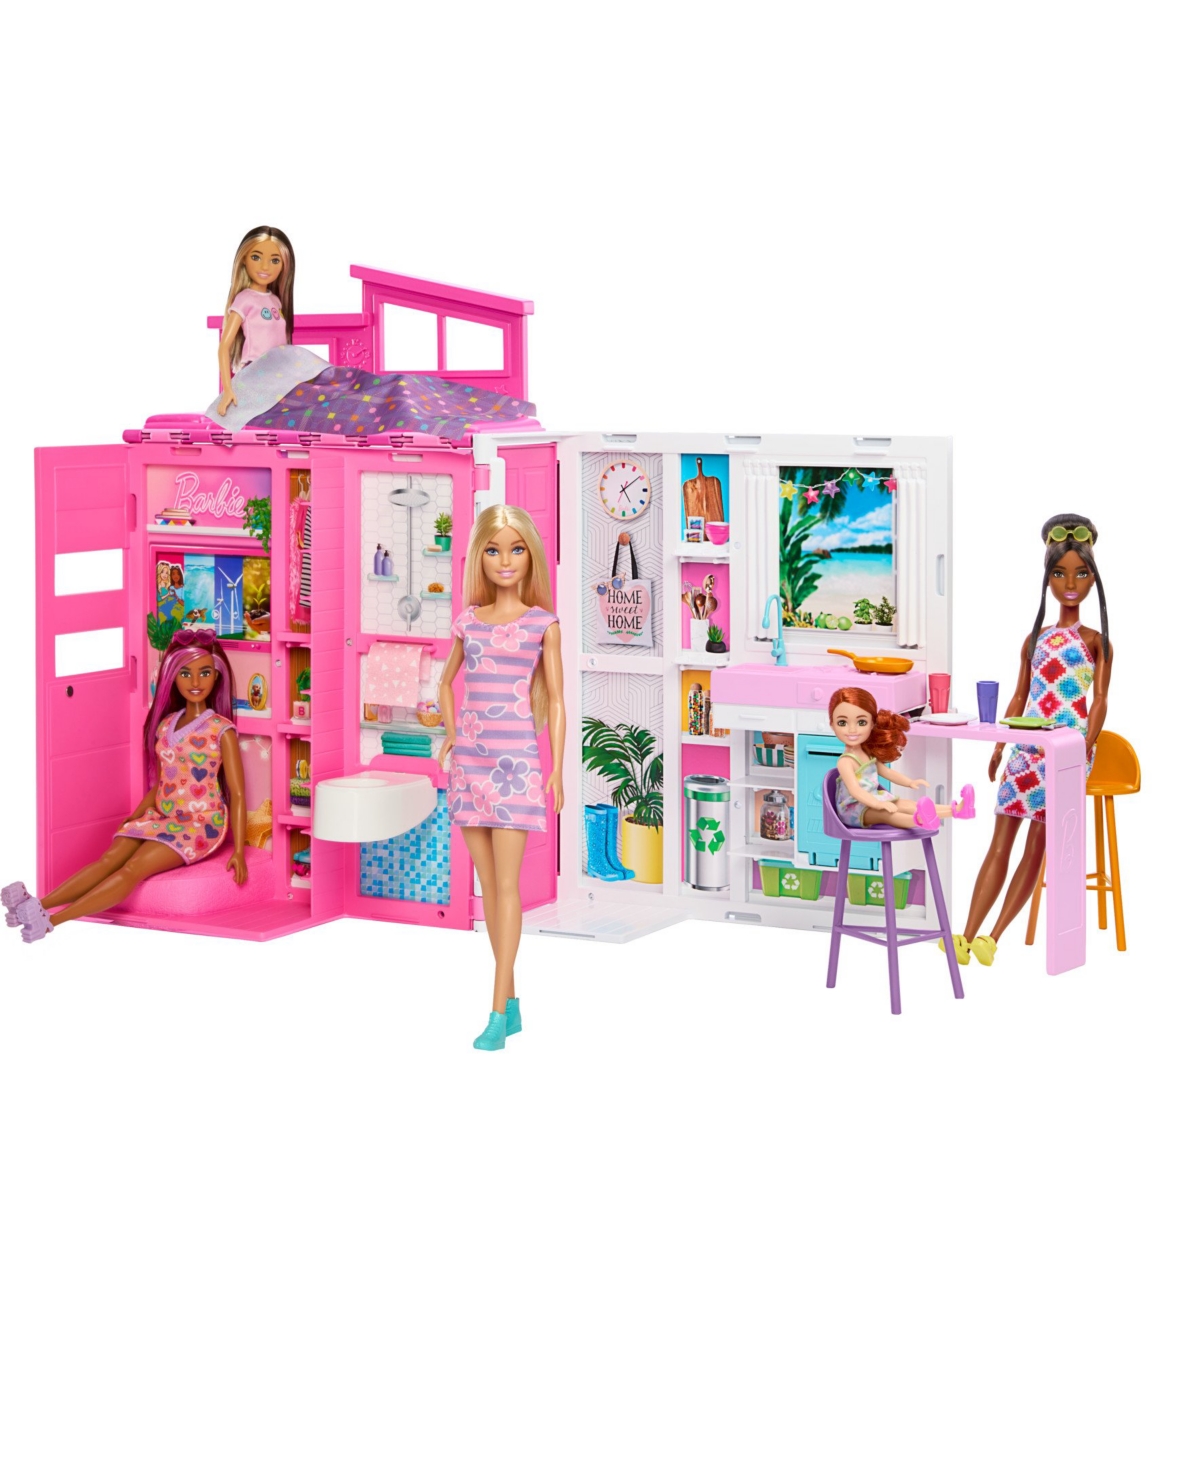 Shop Barbie Getaway Doll House With  Doll, 4 Play Areas And 11 Decor Accessories In Multi